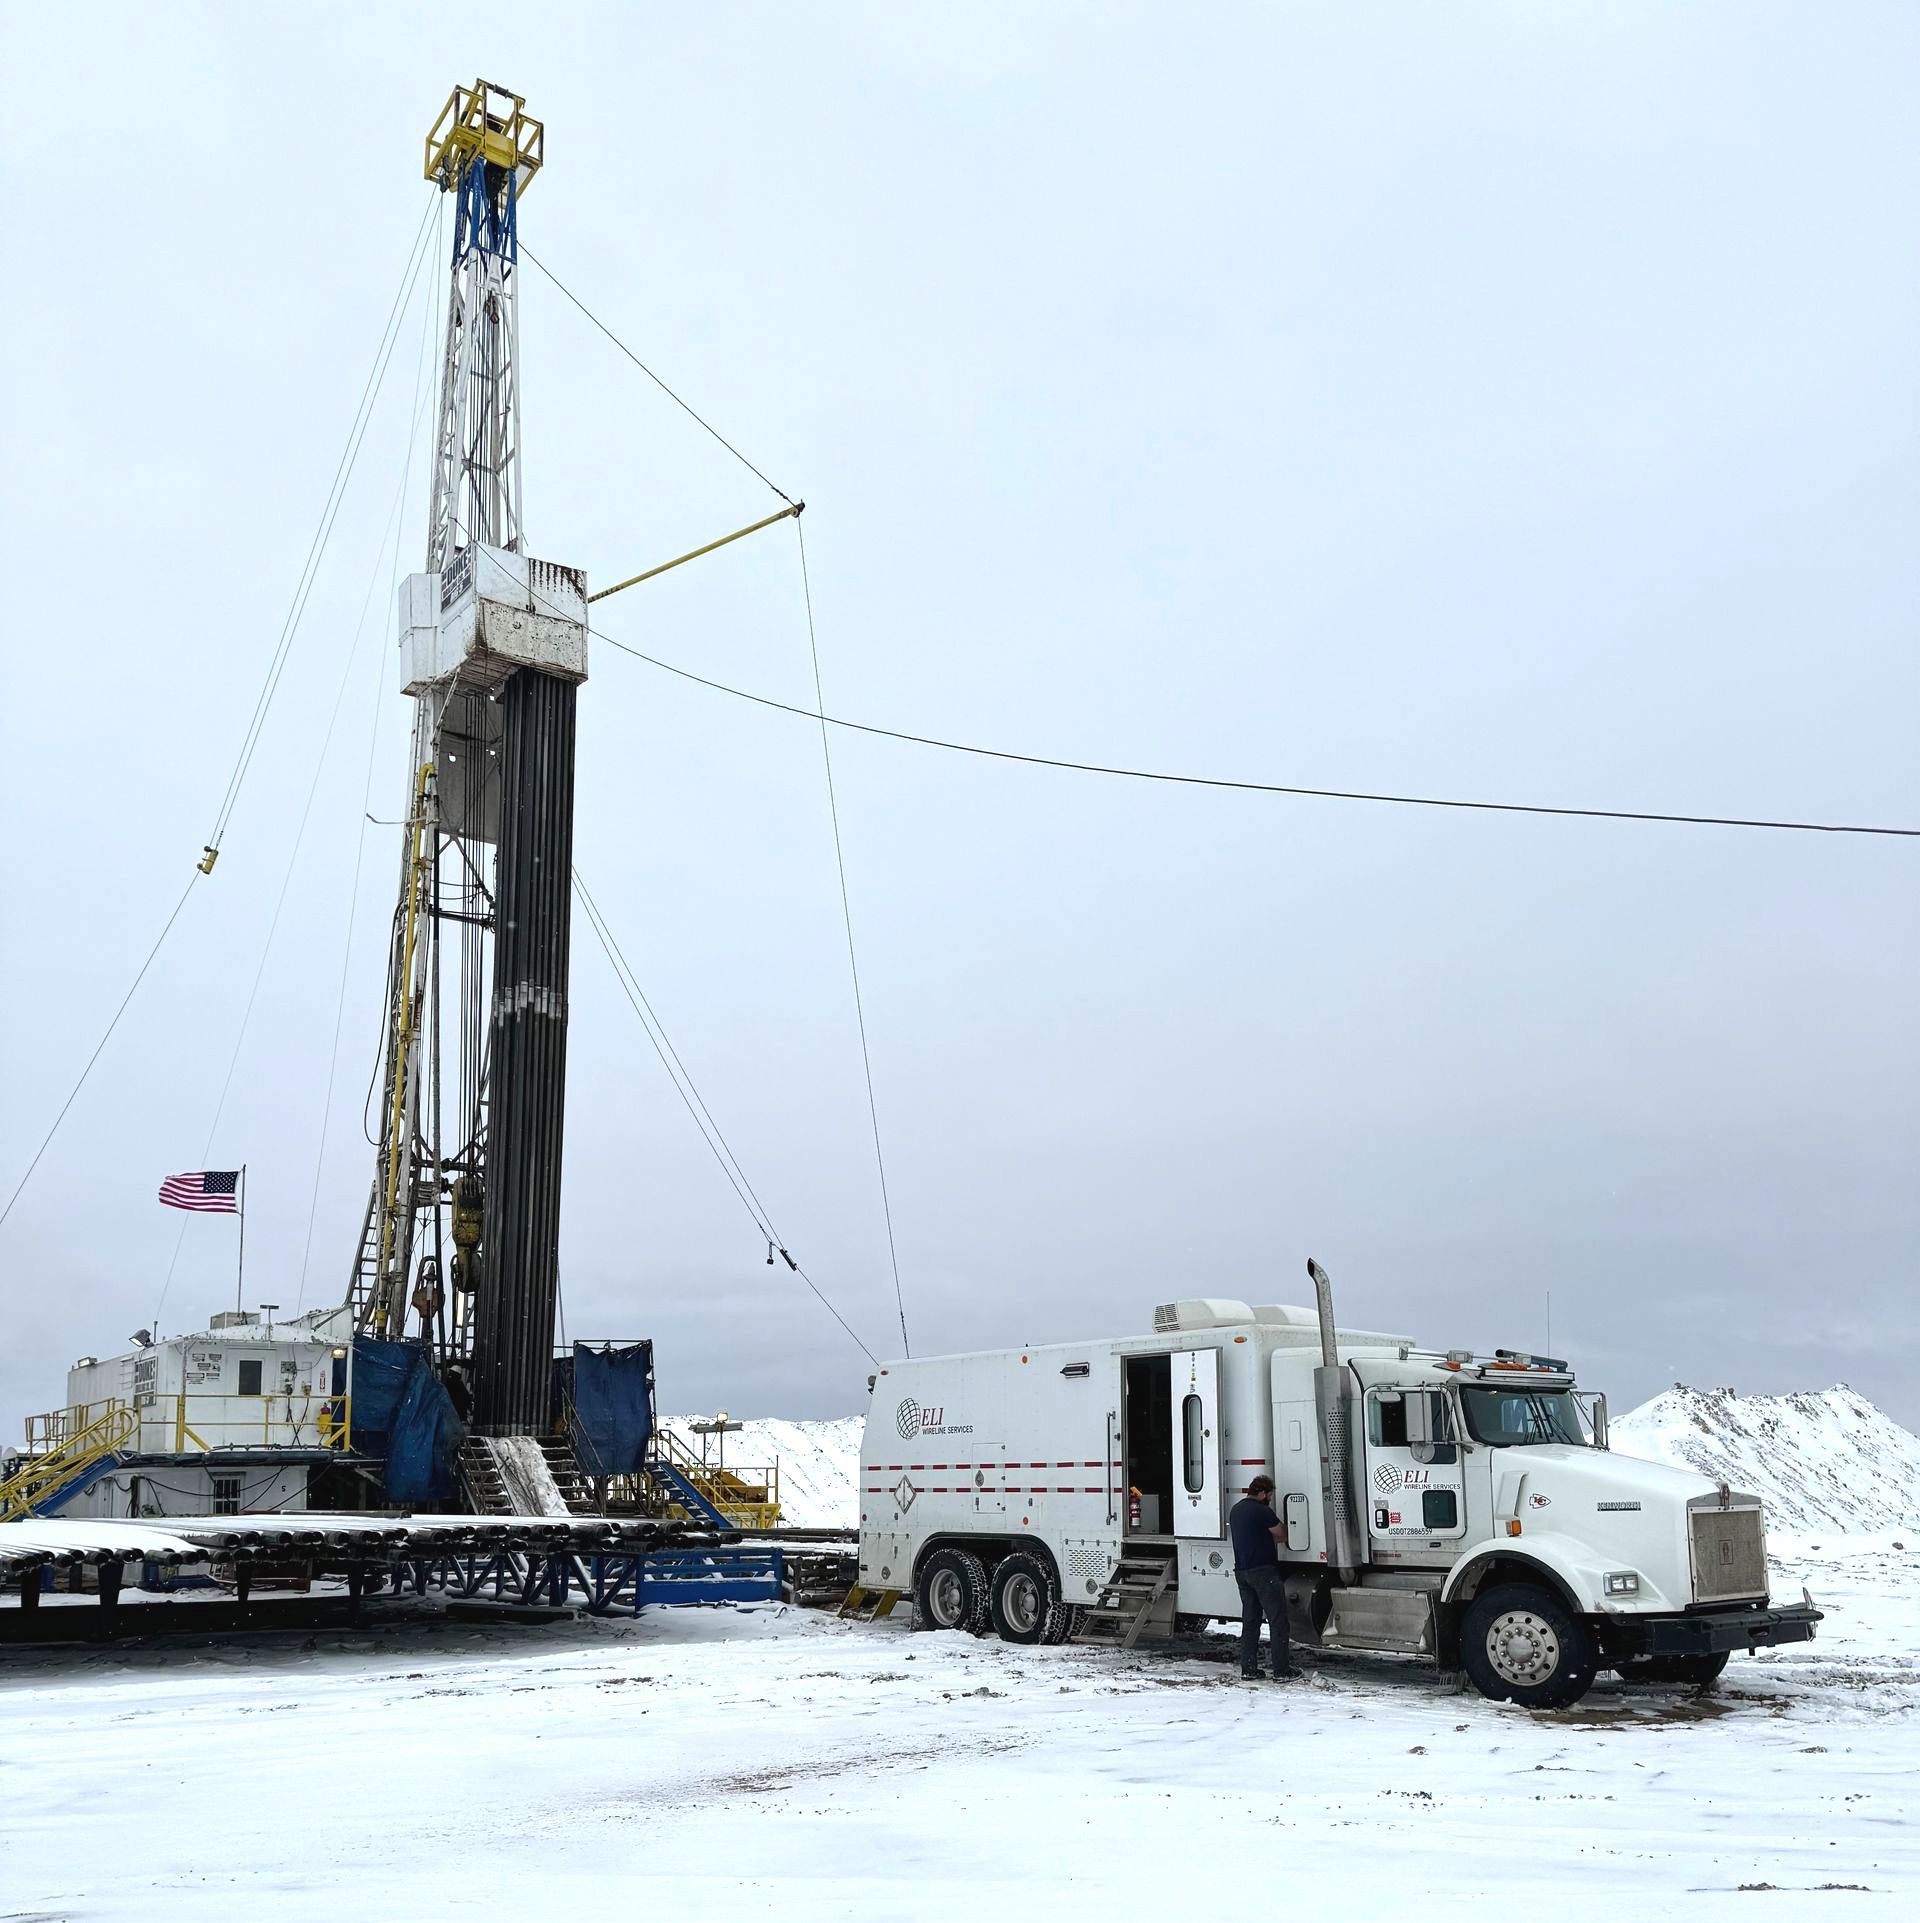 A truck is parked in front of a drilling rig in the snow